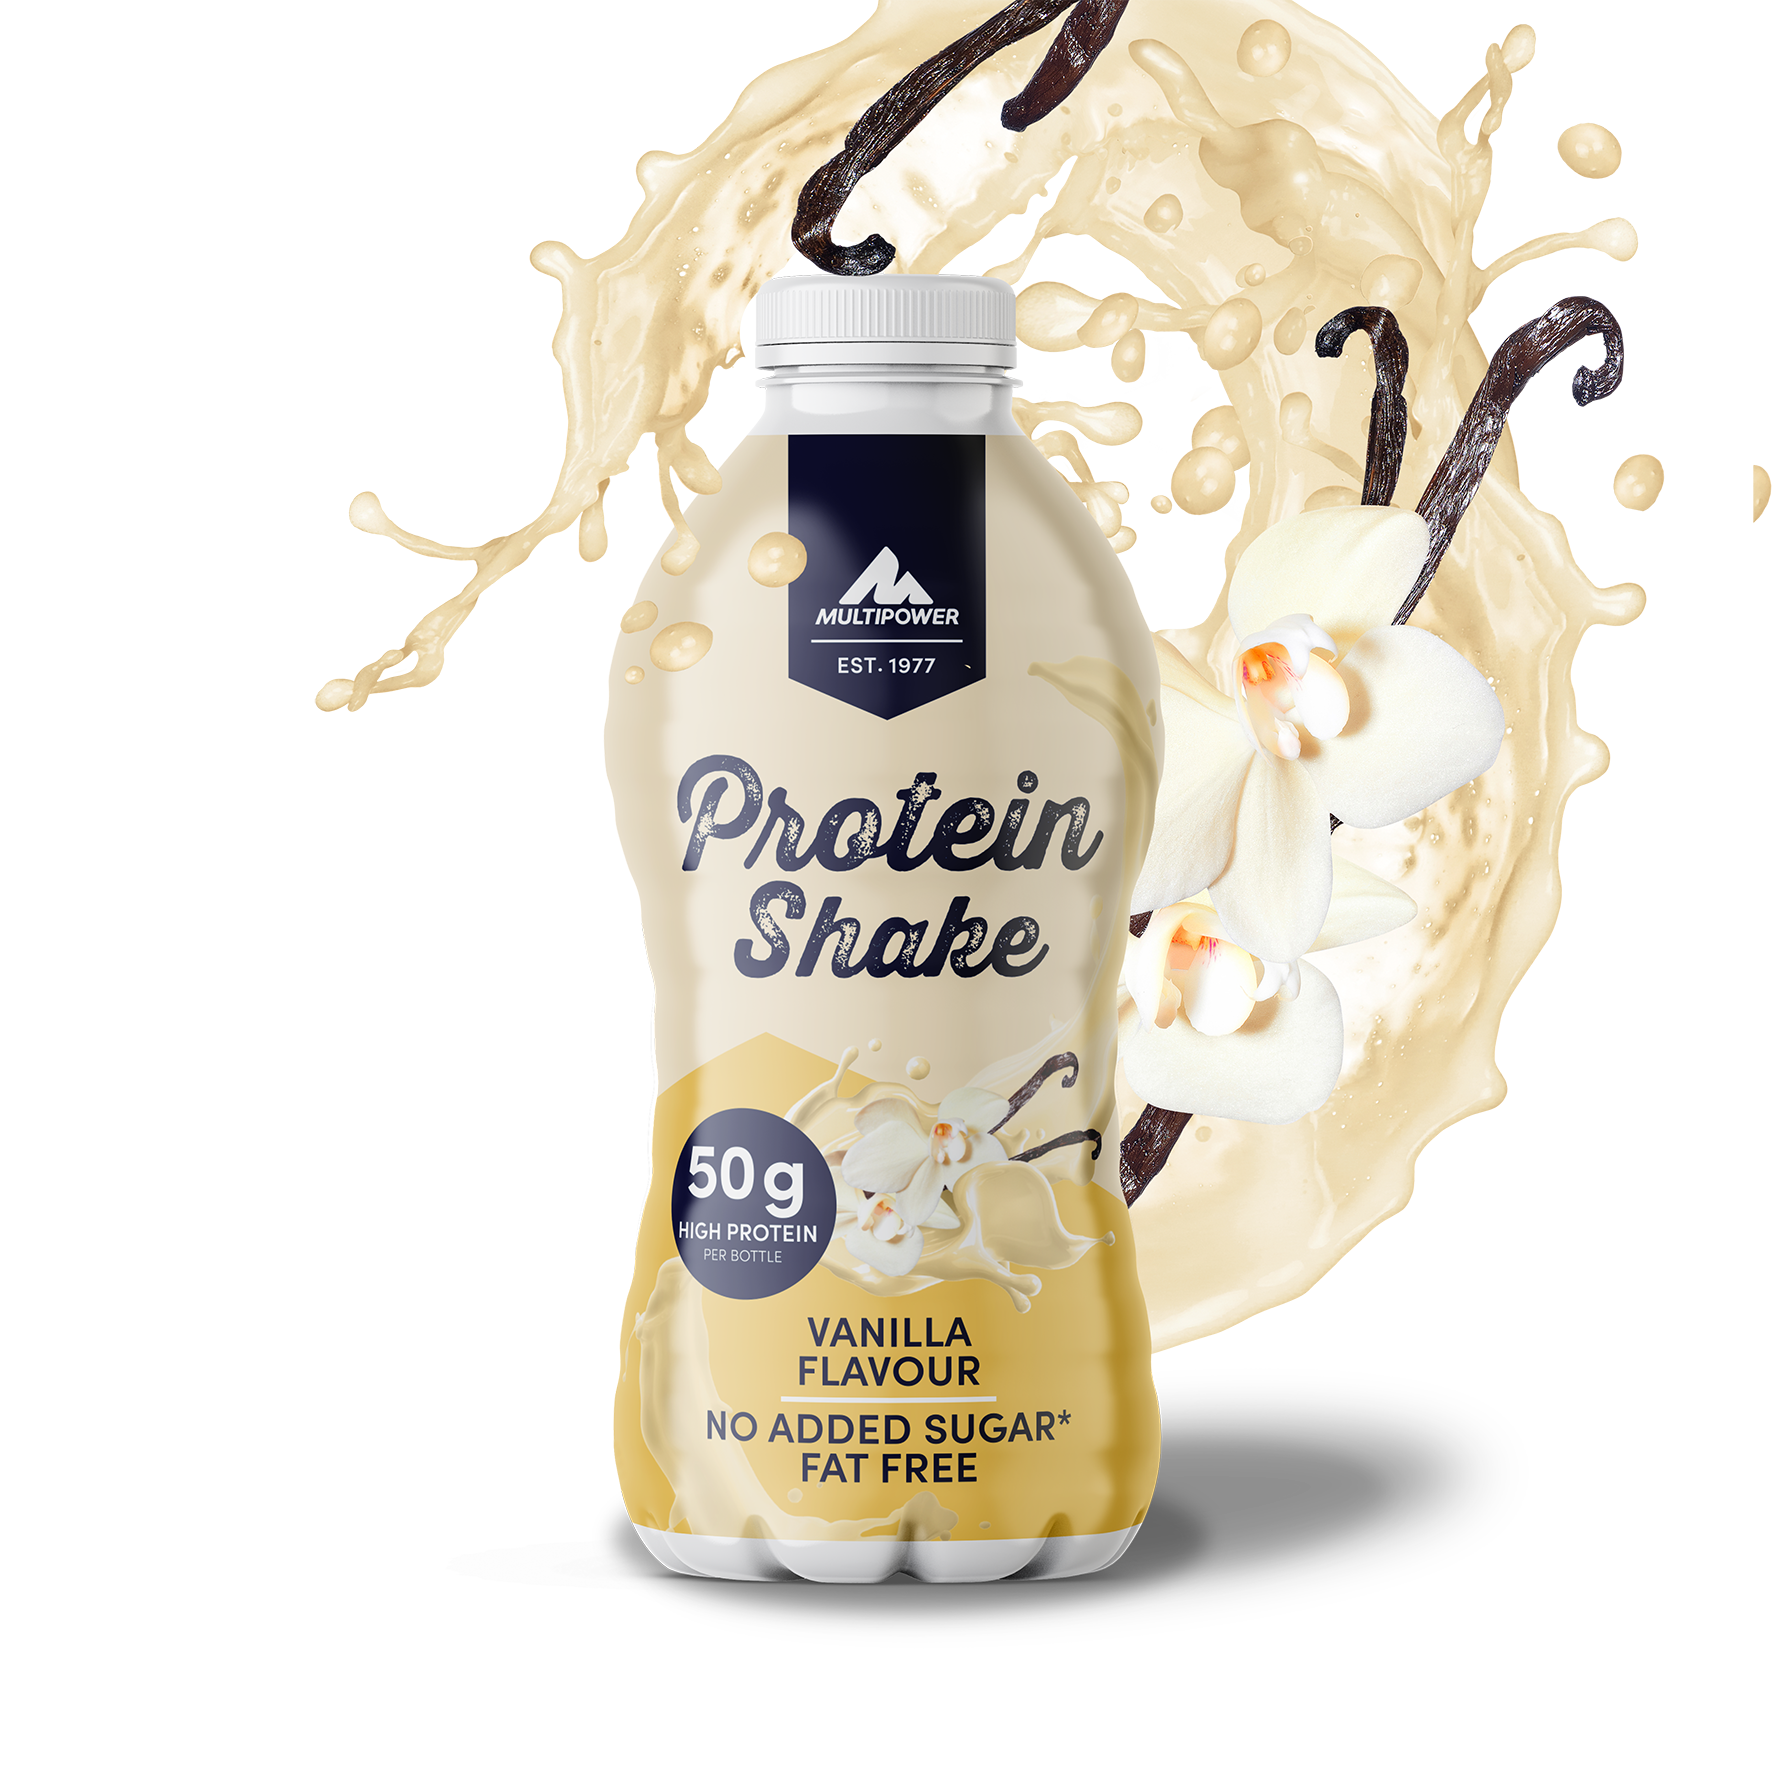 Protein shake with 50g protein per bottle